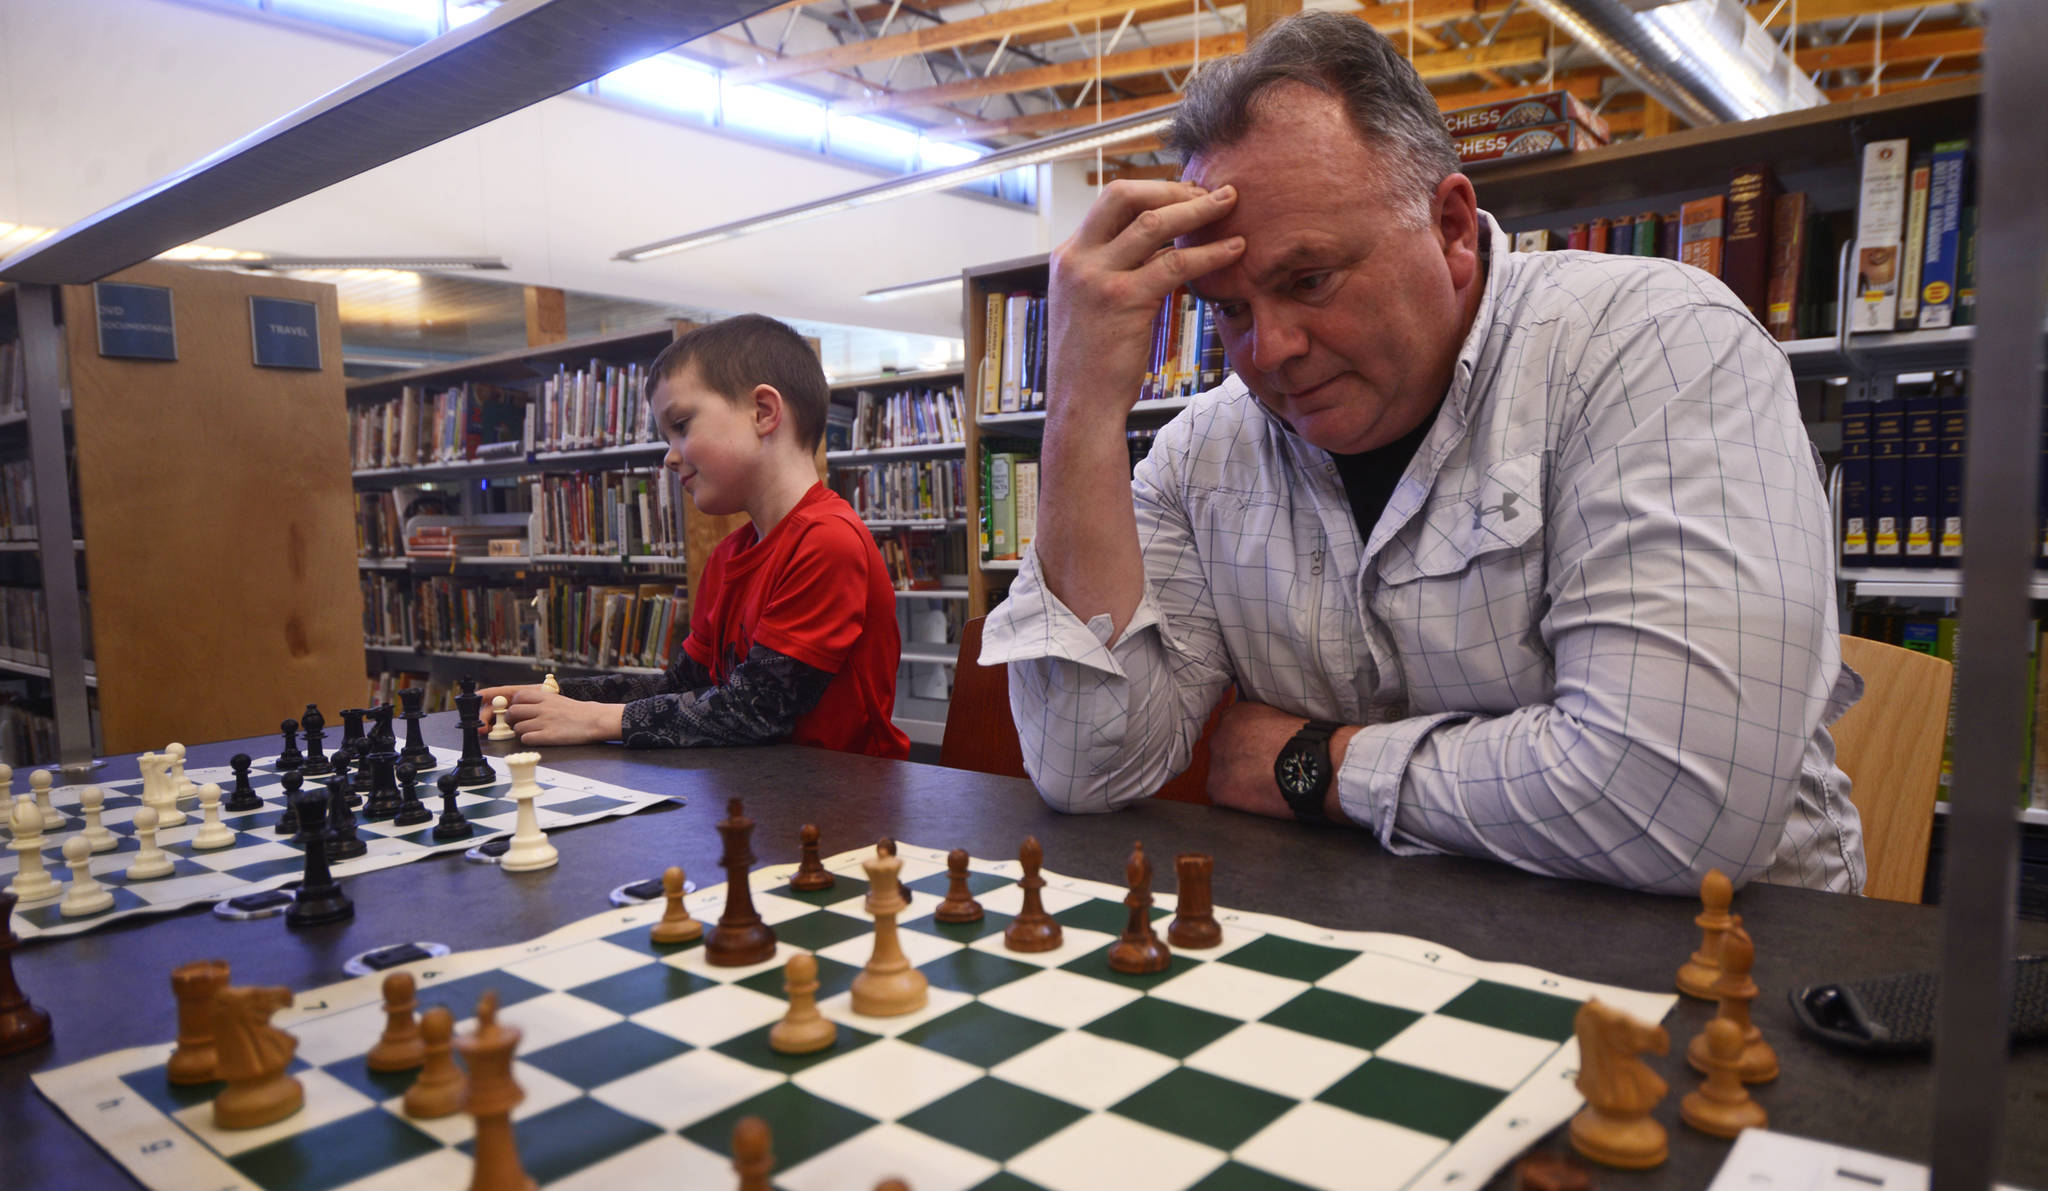 Hal Taylor (left) seeks an escape from check in a chess game against Andy Veh on Tuesday, March 21, 2017 in the Kenai Community Library. Taylor helped organize a chess club that plays in the Kenai Library every Tuesday at 4 p.m.